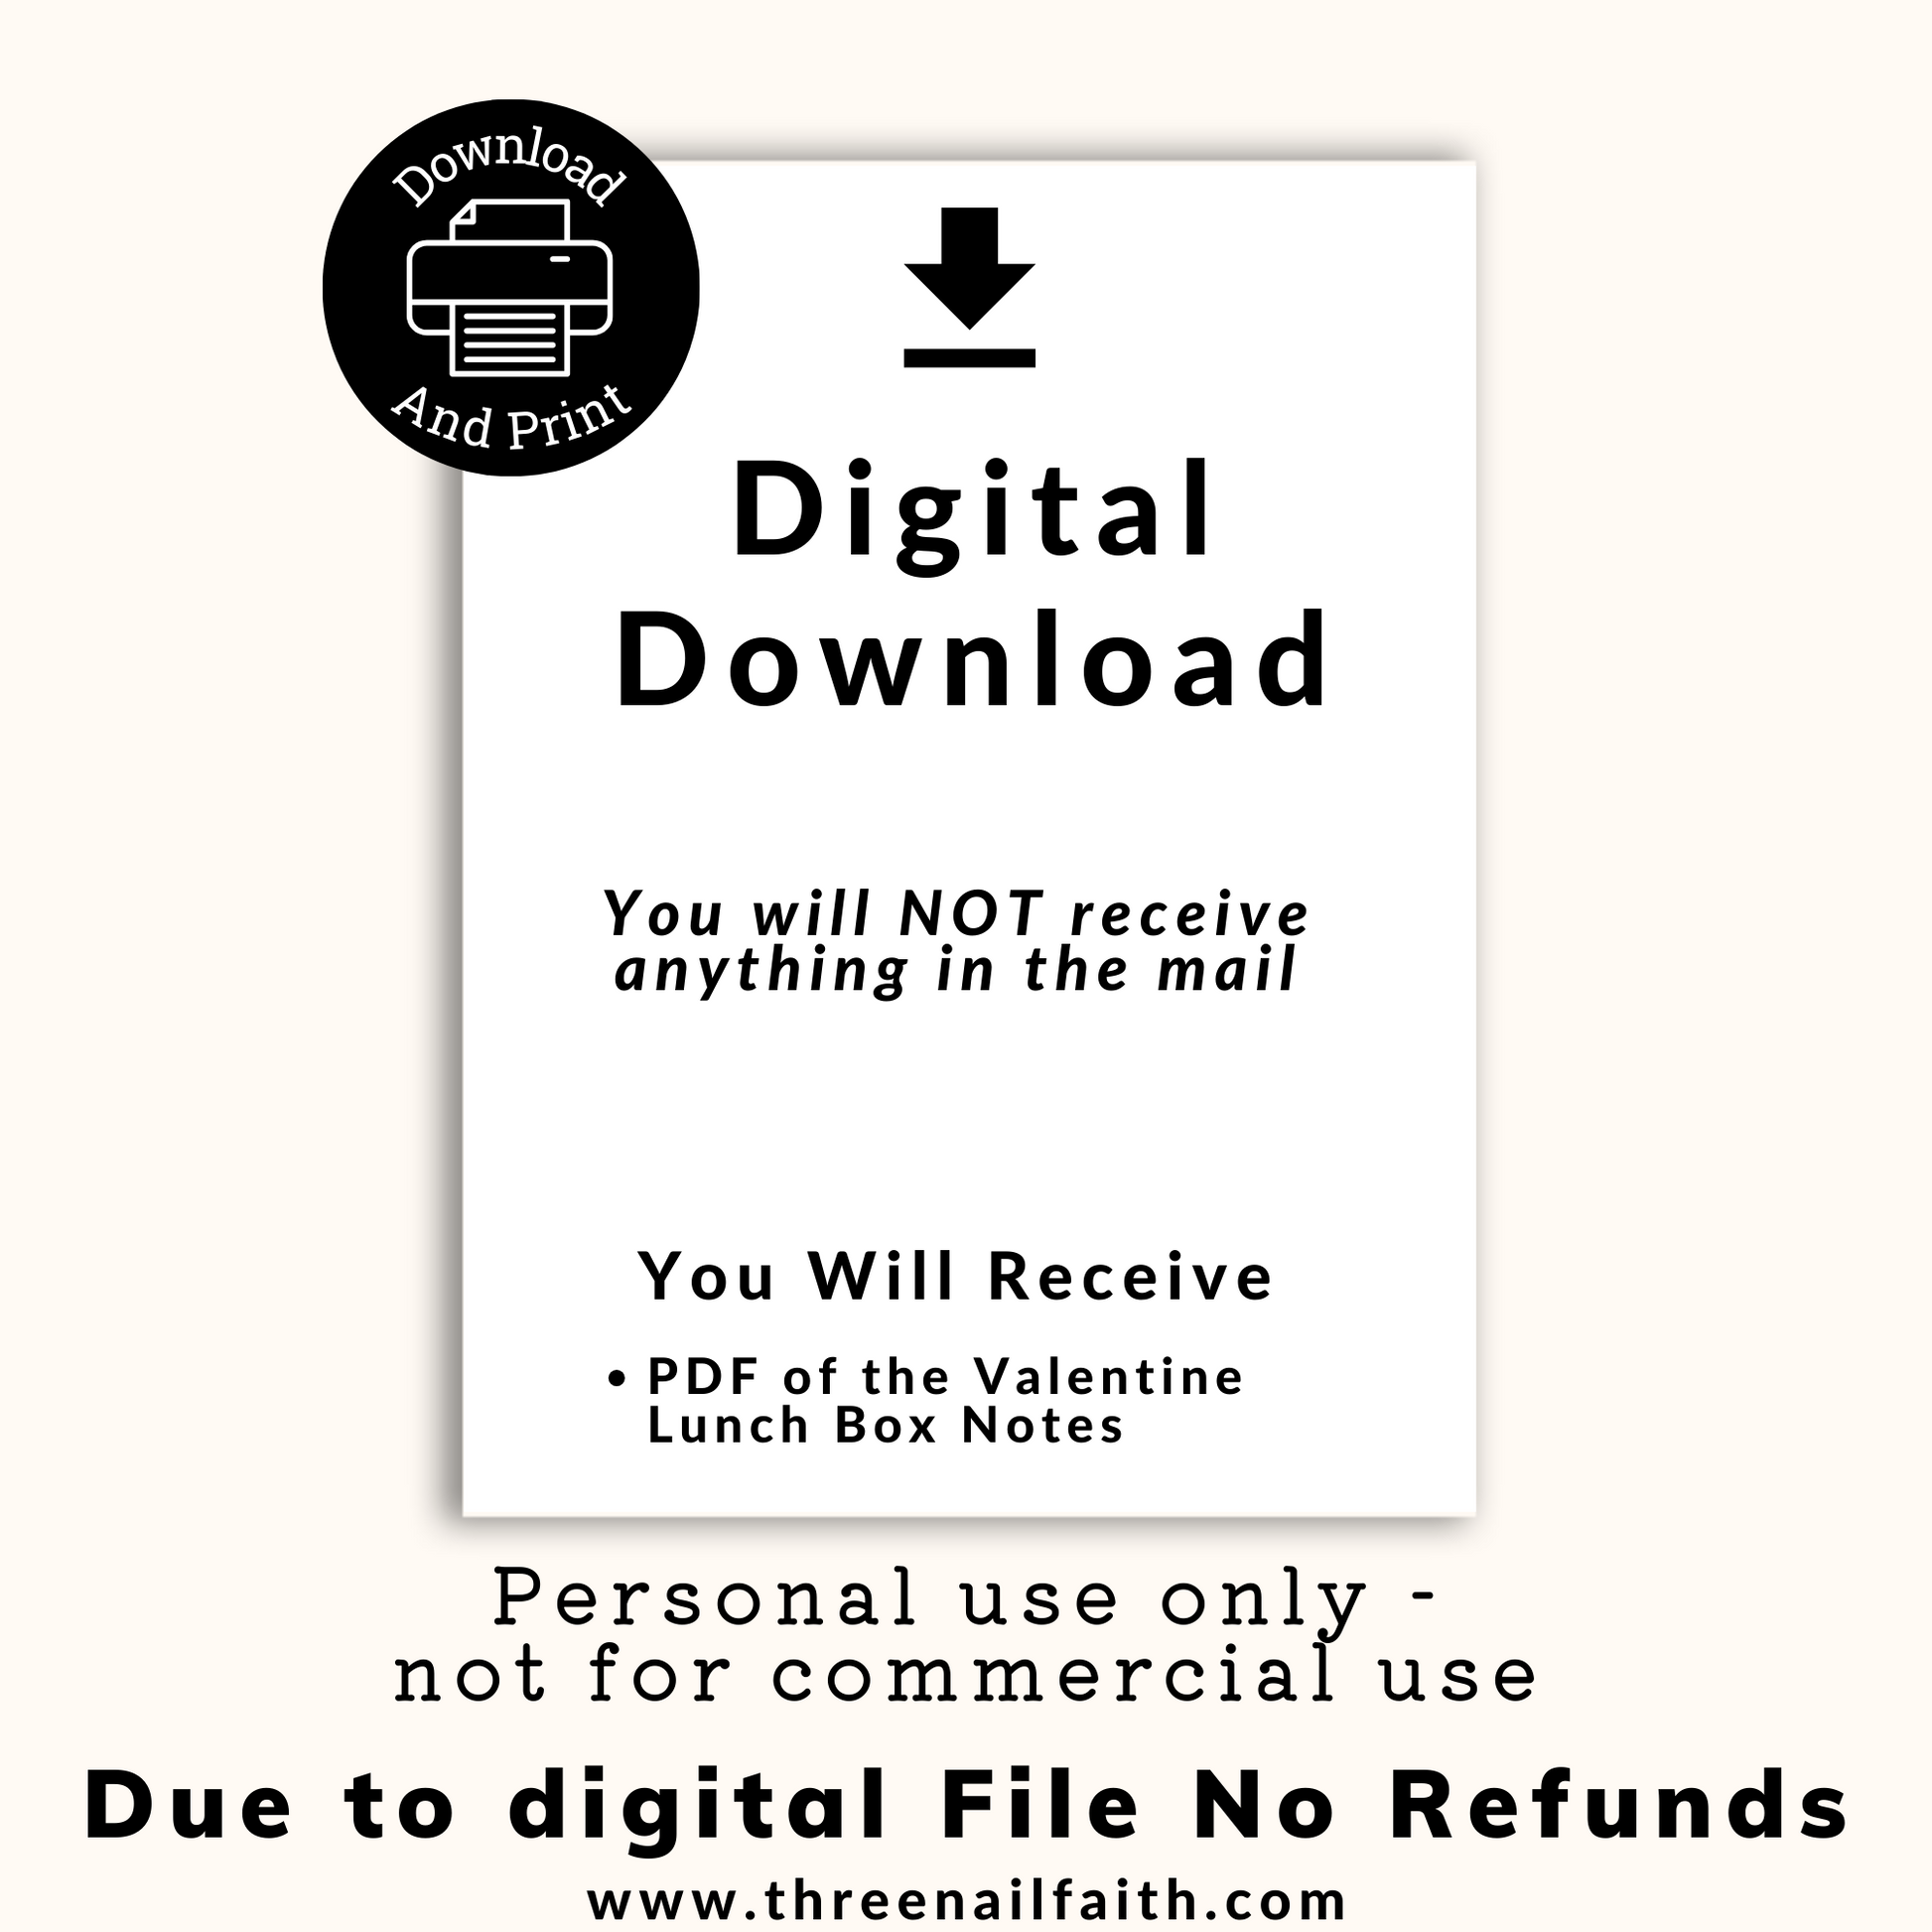 Digital Download nothing will be shipped to you.